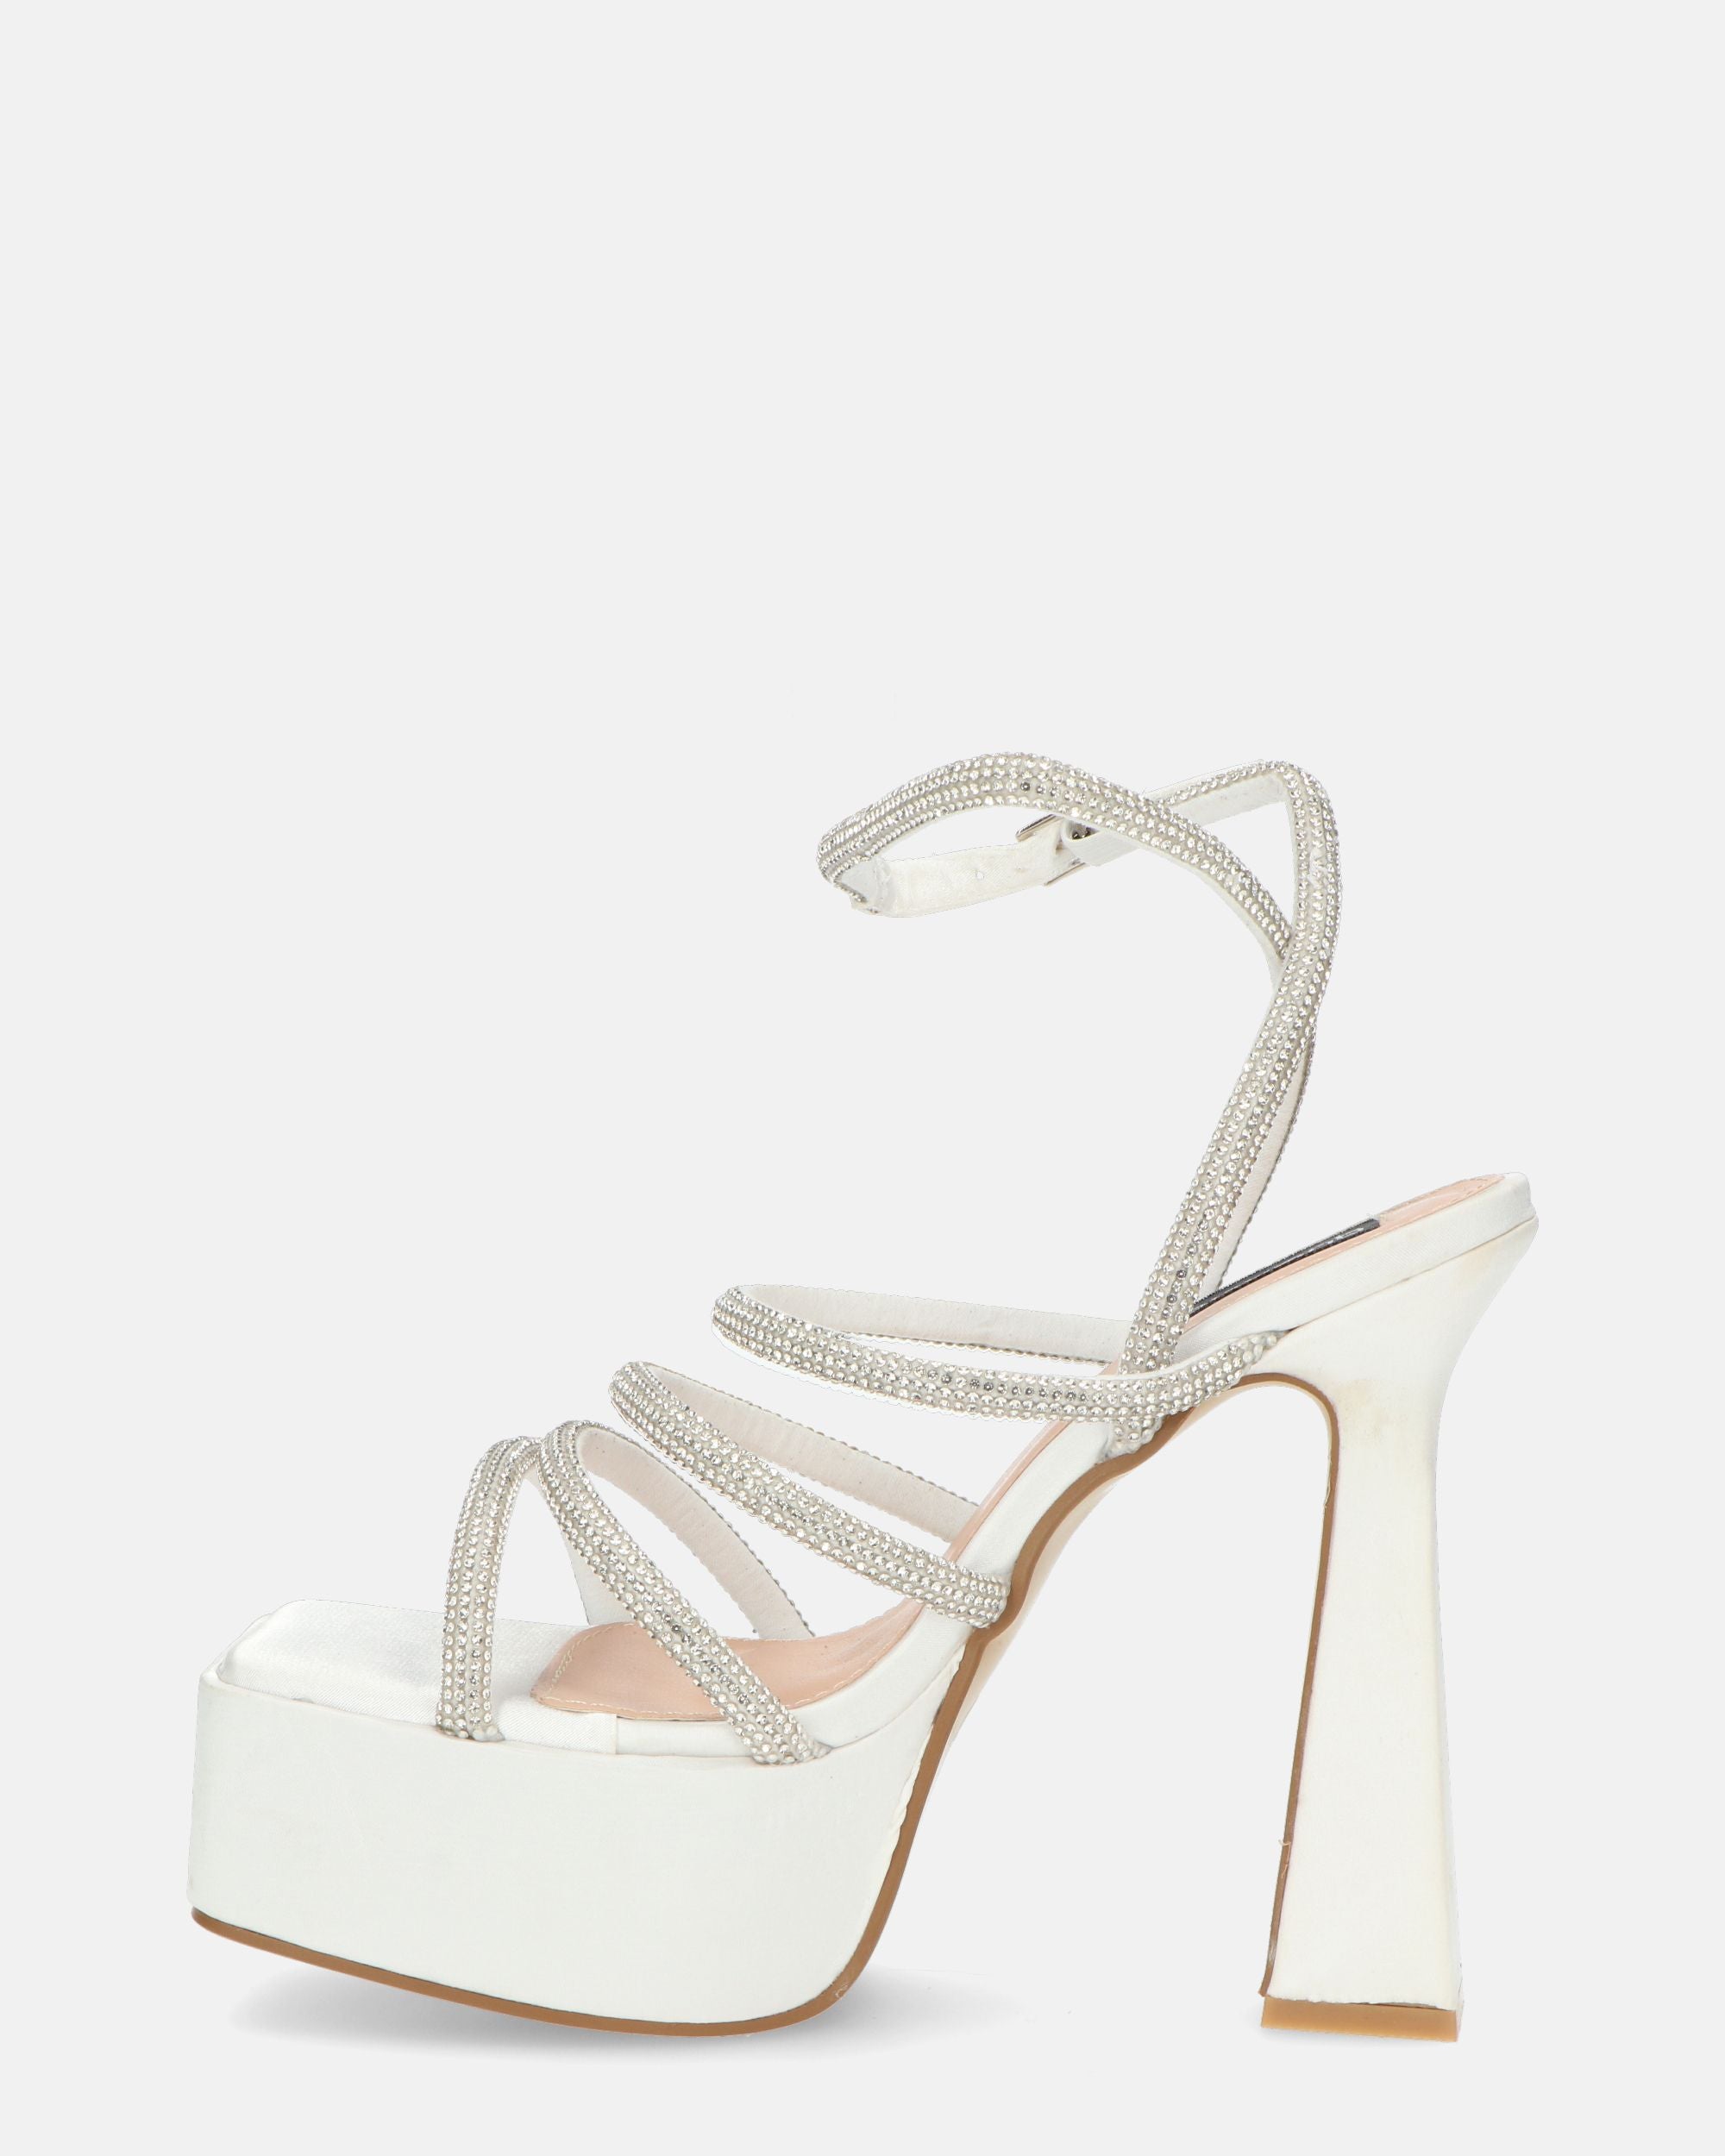 MADELYN - white lycra sandals with gems